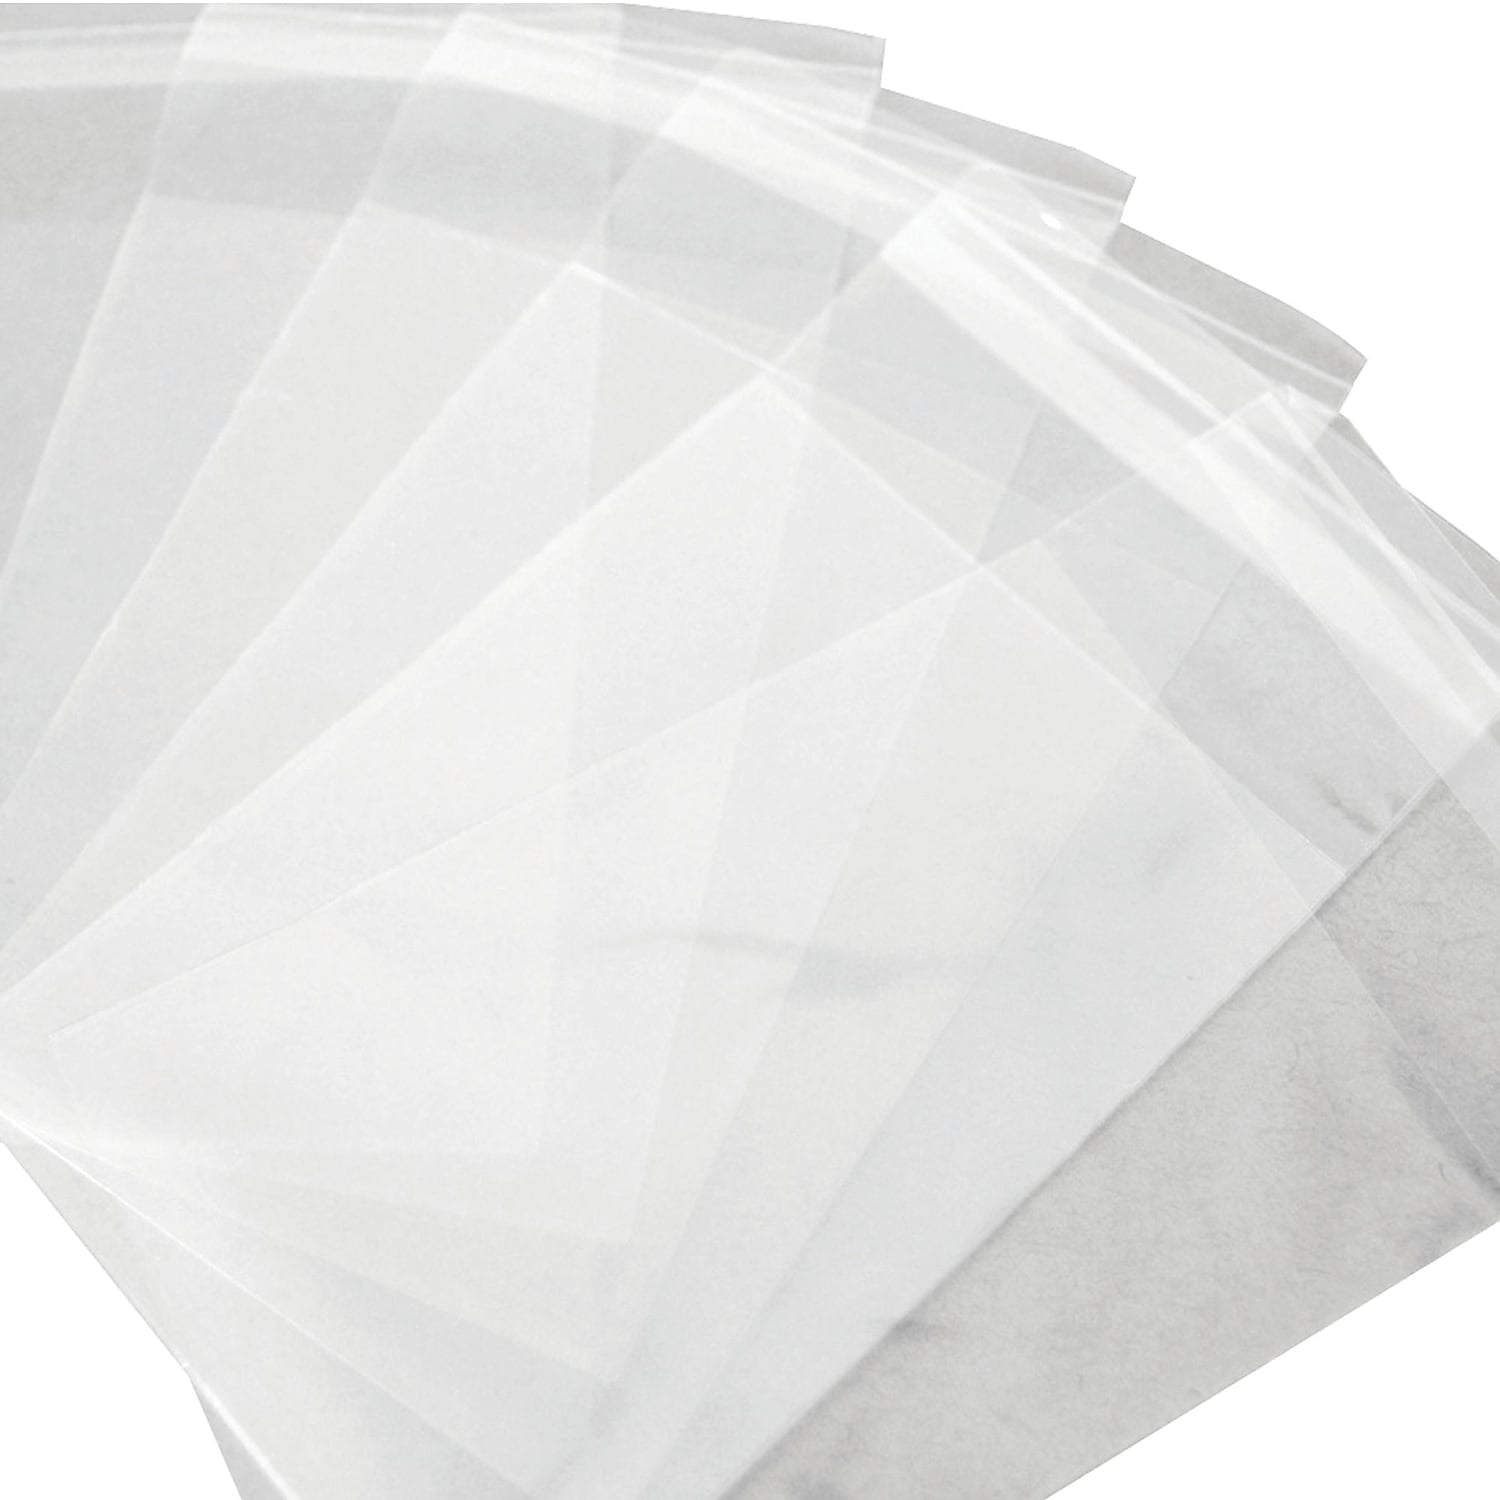 Pbr127 8 X 10 In. 1.5 Mil Resealable Polypropylene Bags Case, Pack Of 1000